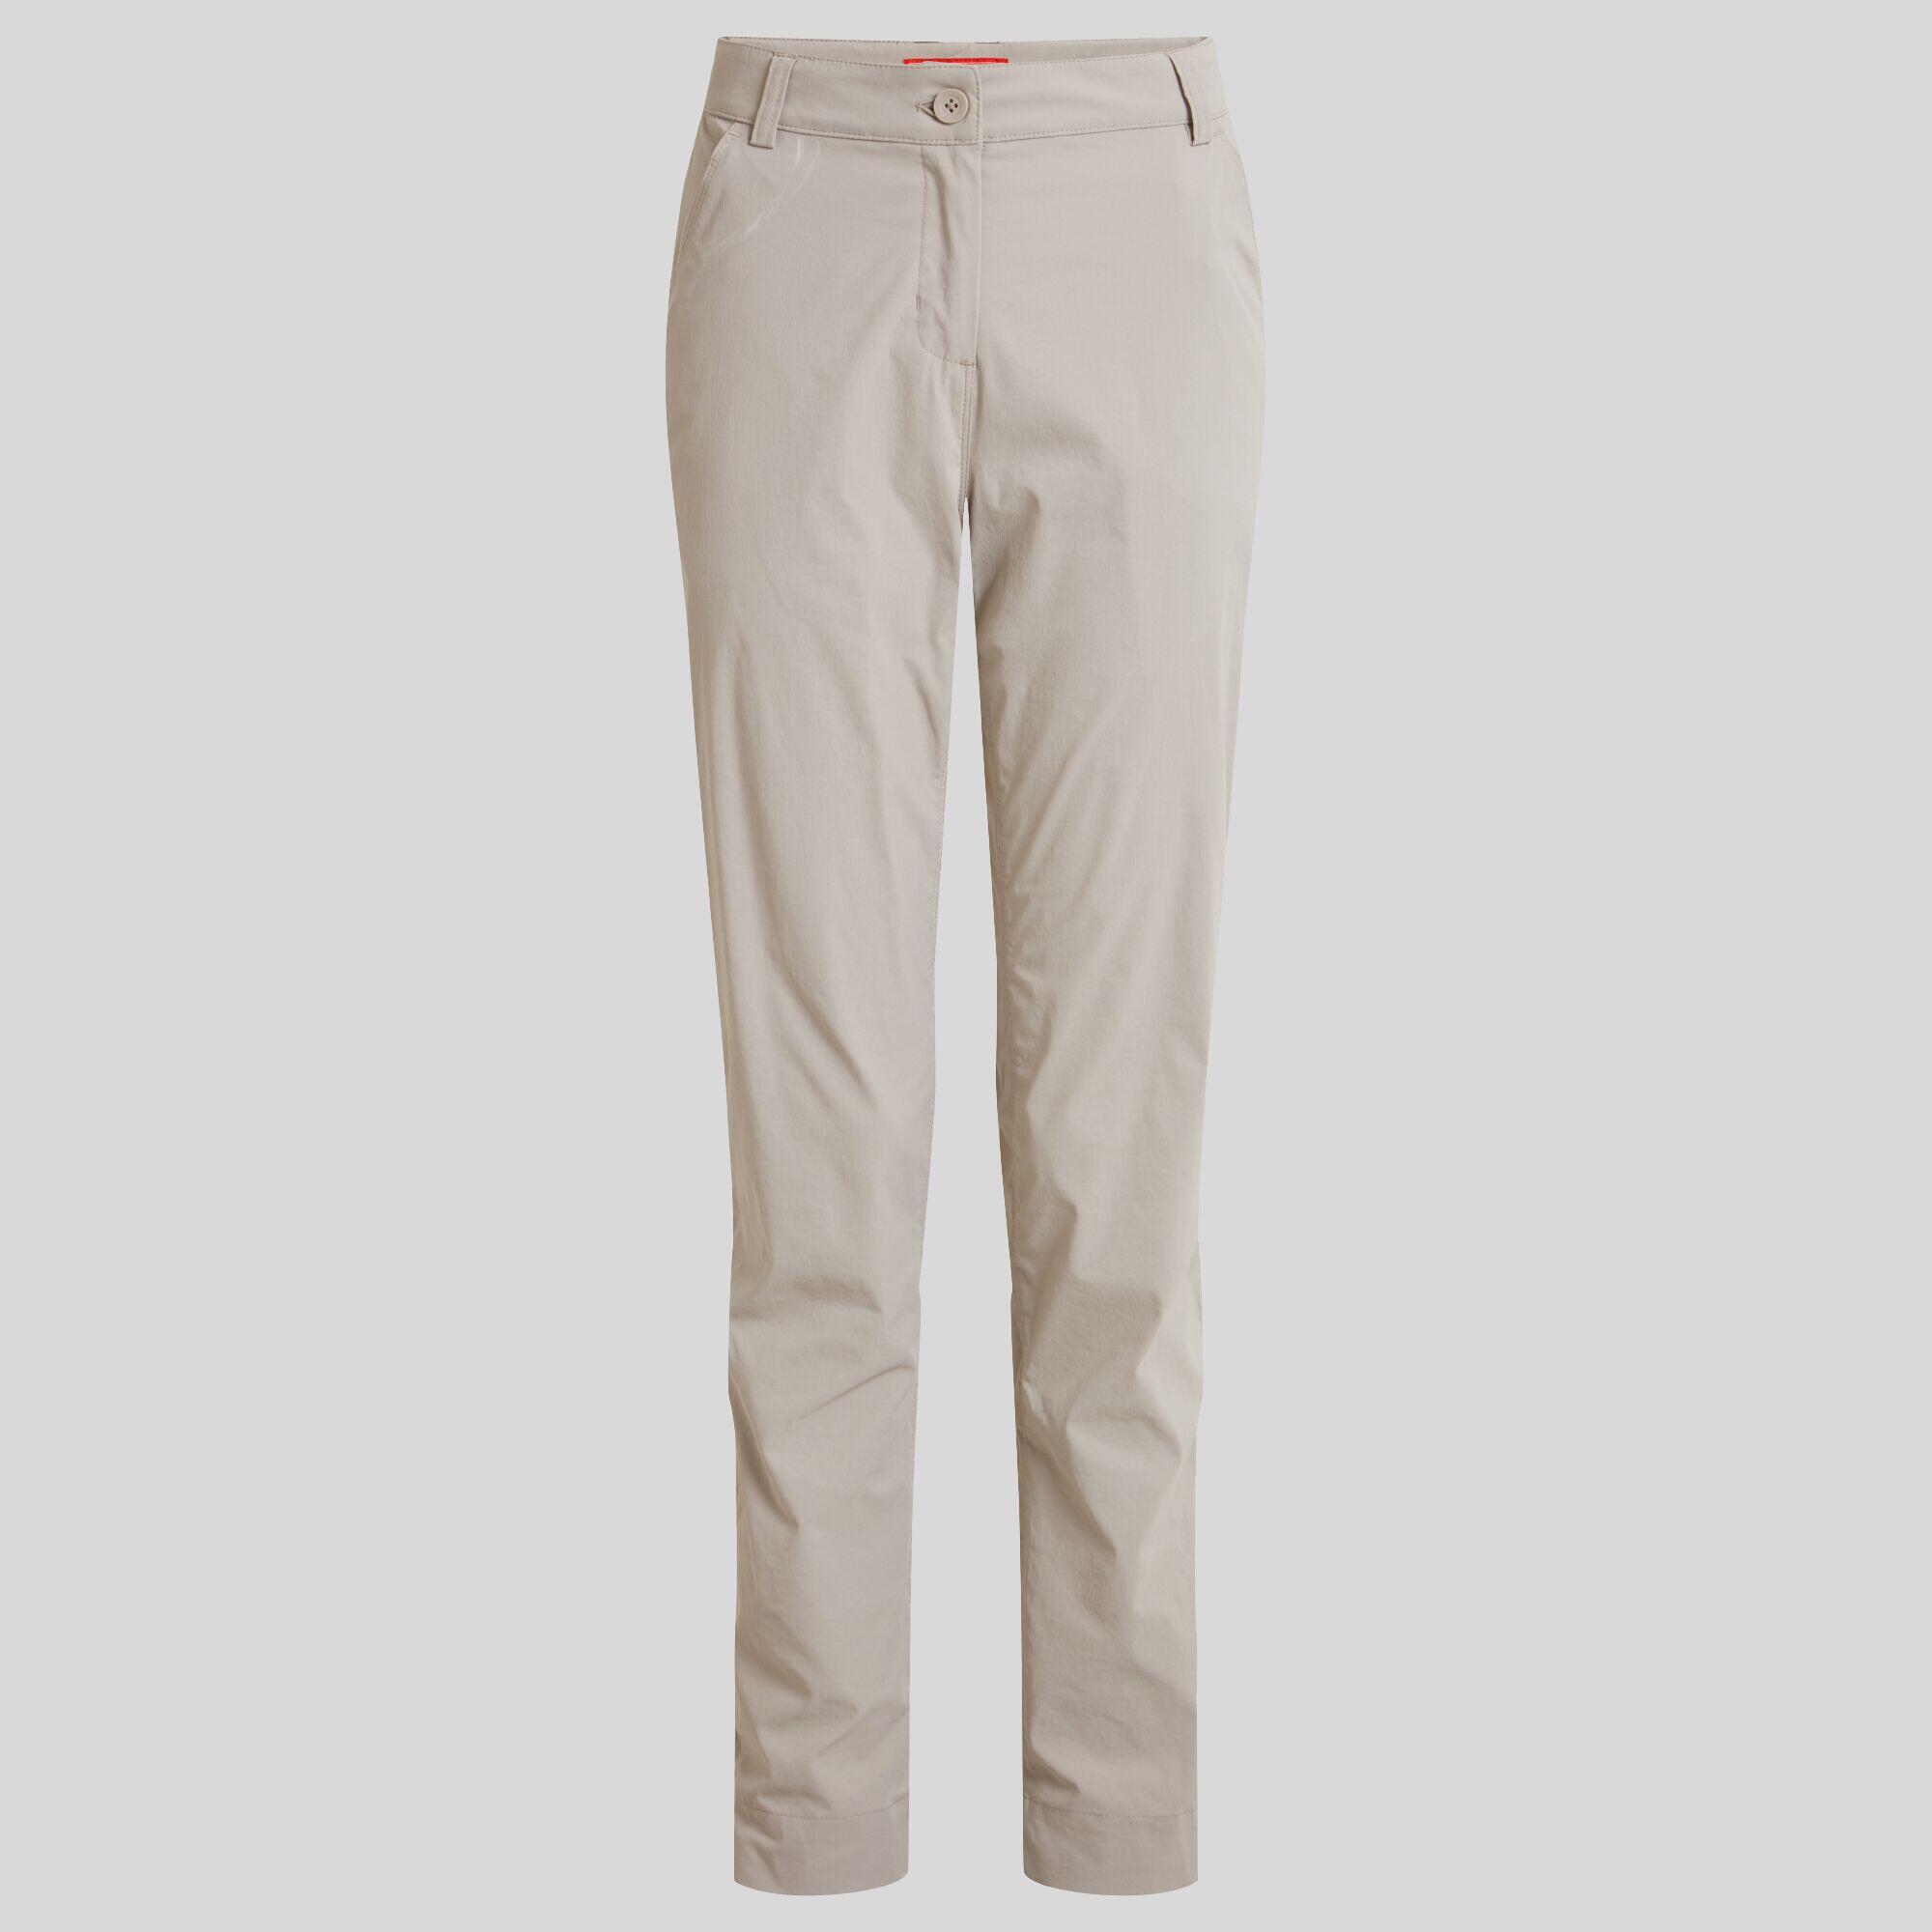 CRAGHOPPERS Womens Nosilife Milla Trouser